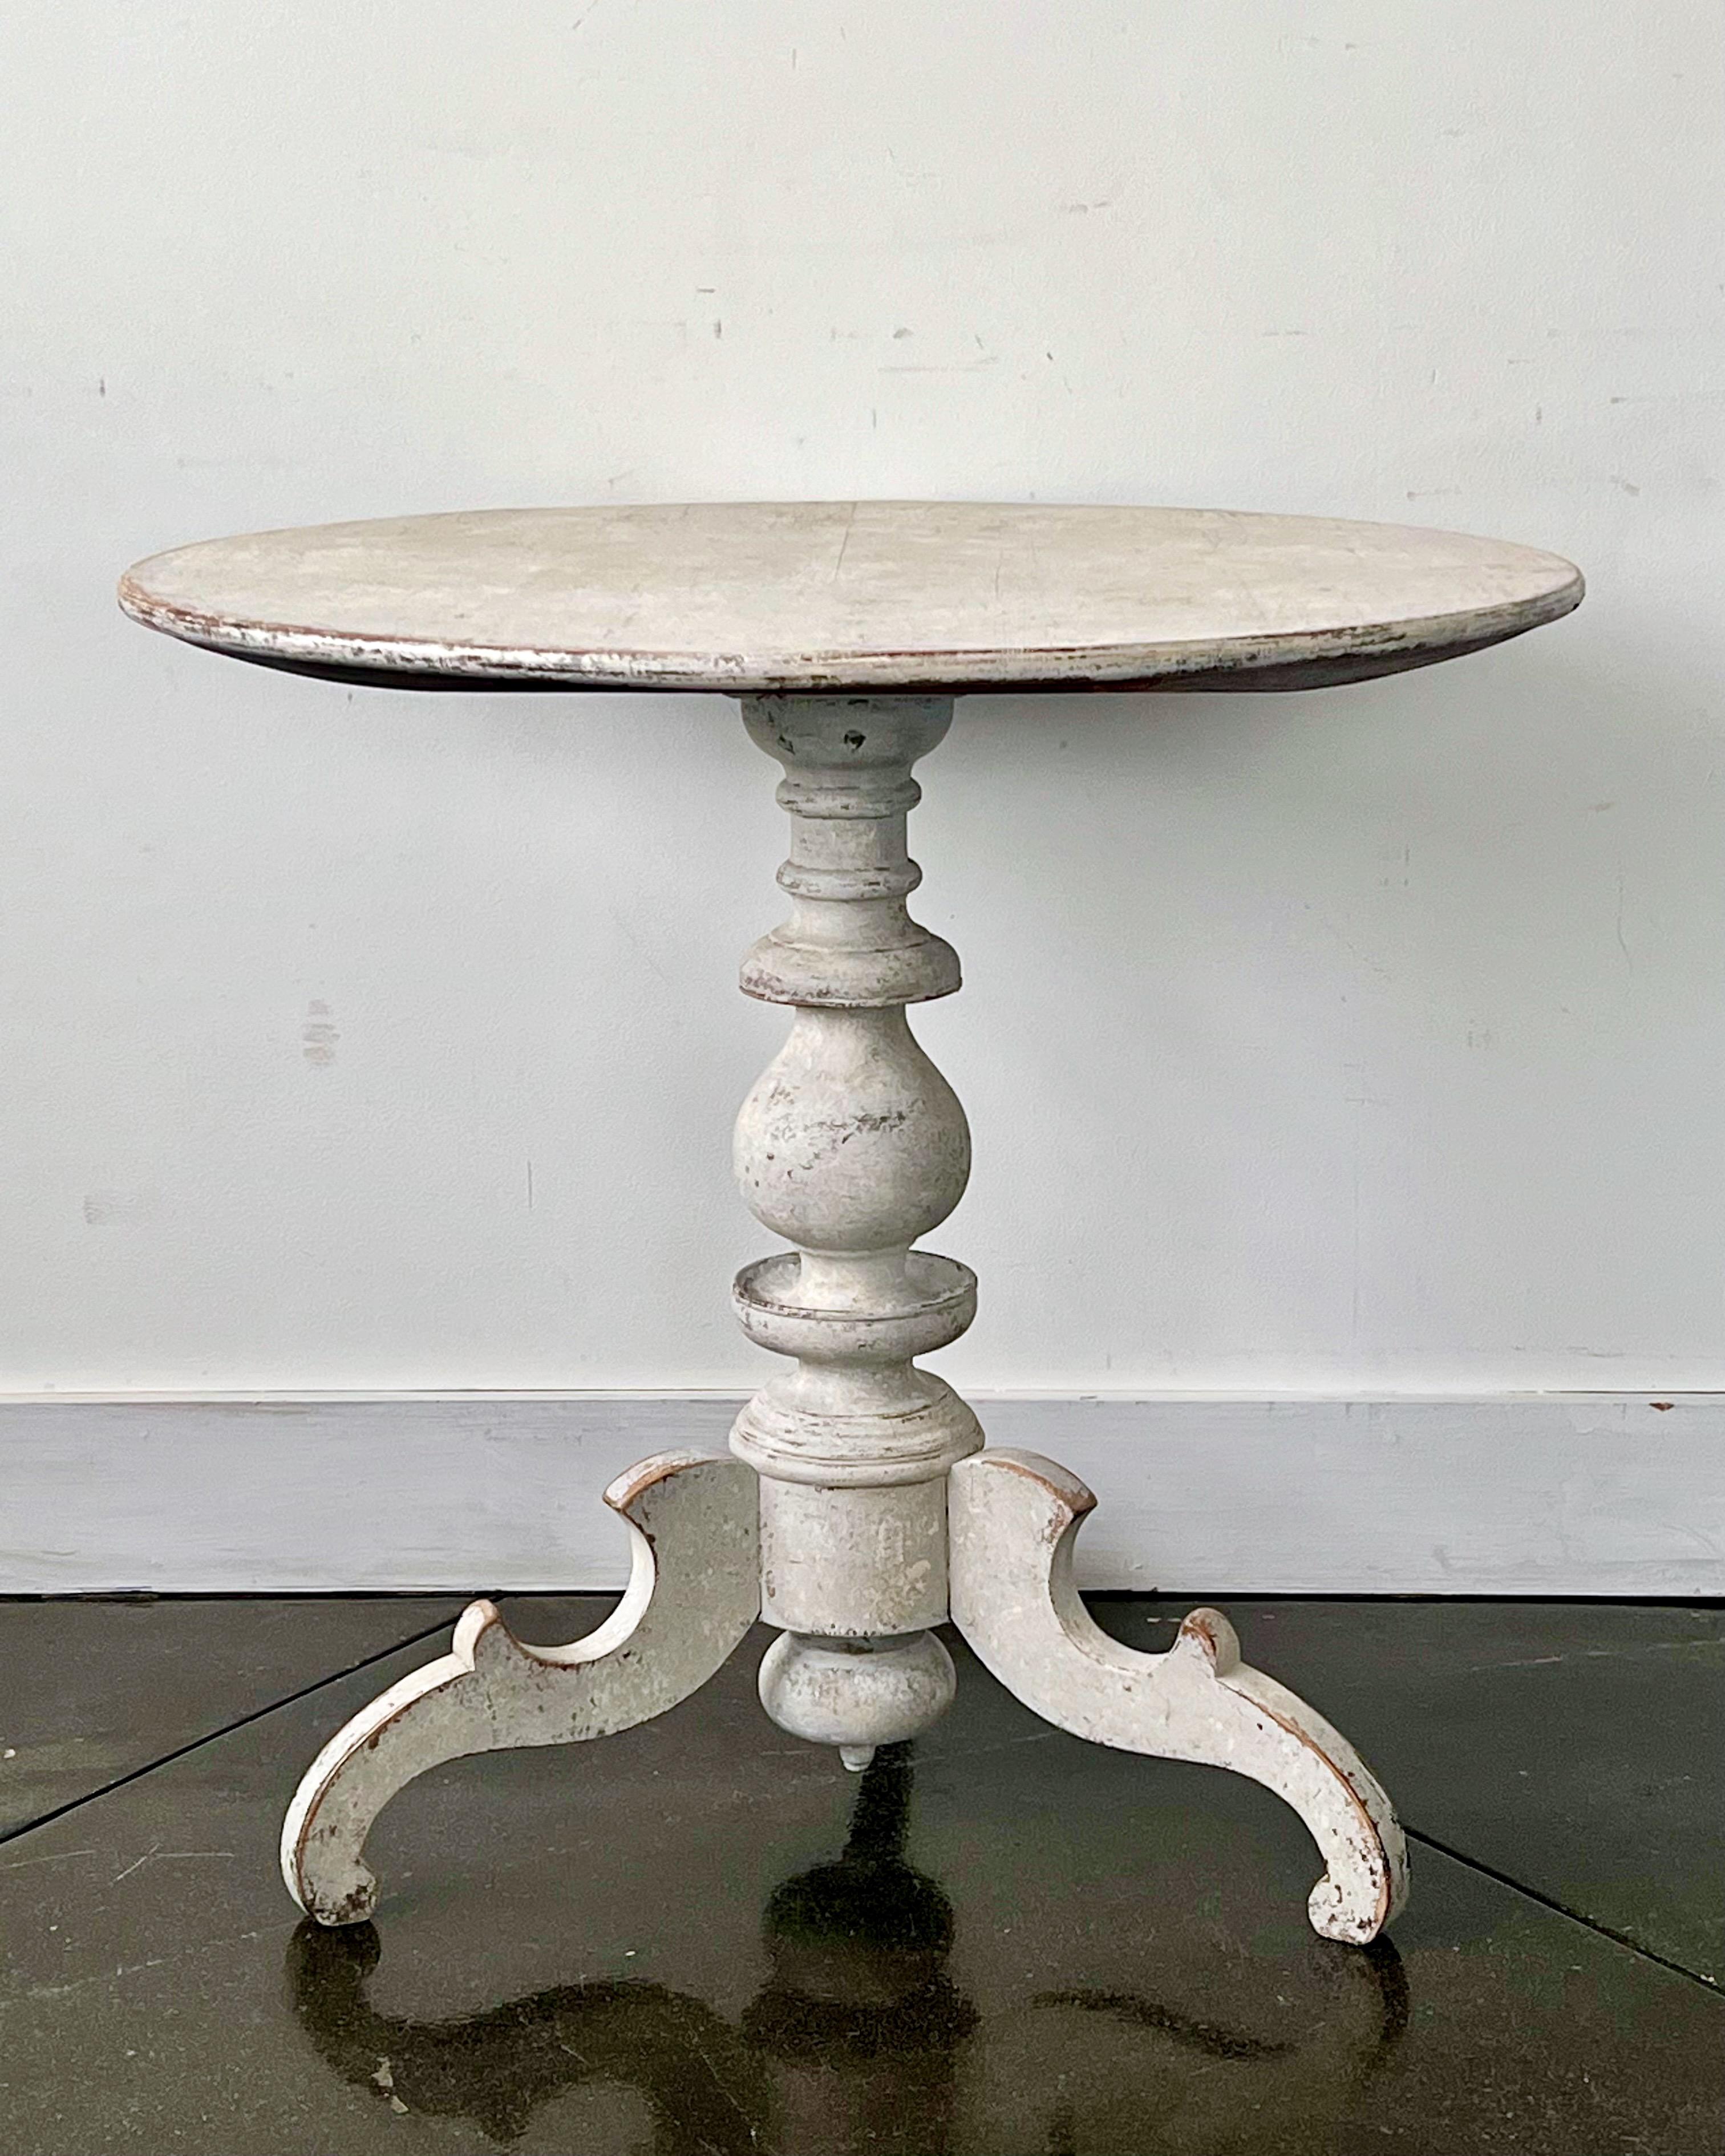 A charming large pedestal table with circular top and turned base supported by intricately carved scolling legs in Gustavian style.
Could be use as a small breakfast table
Värmland, Sweden, circa 1840-1850.